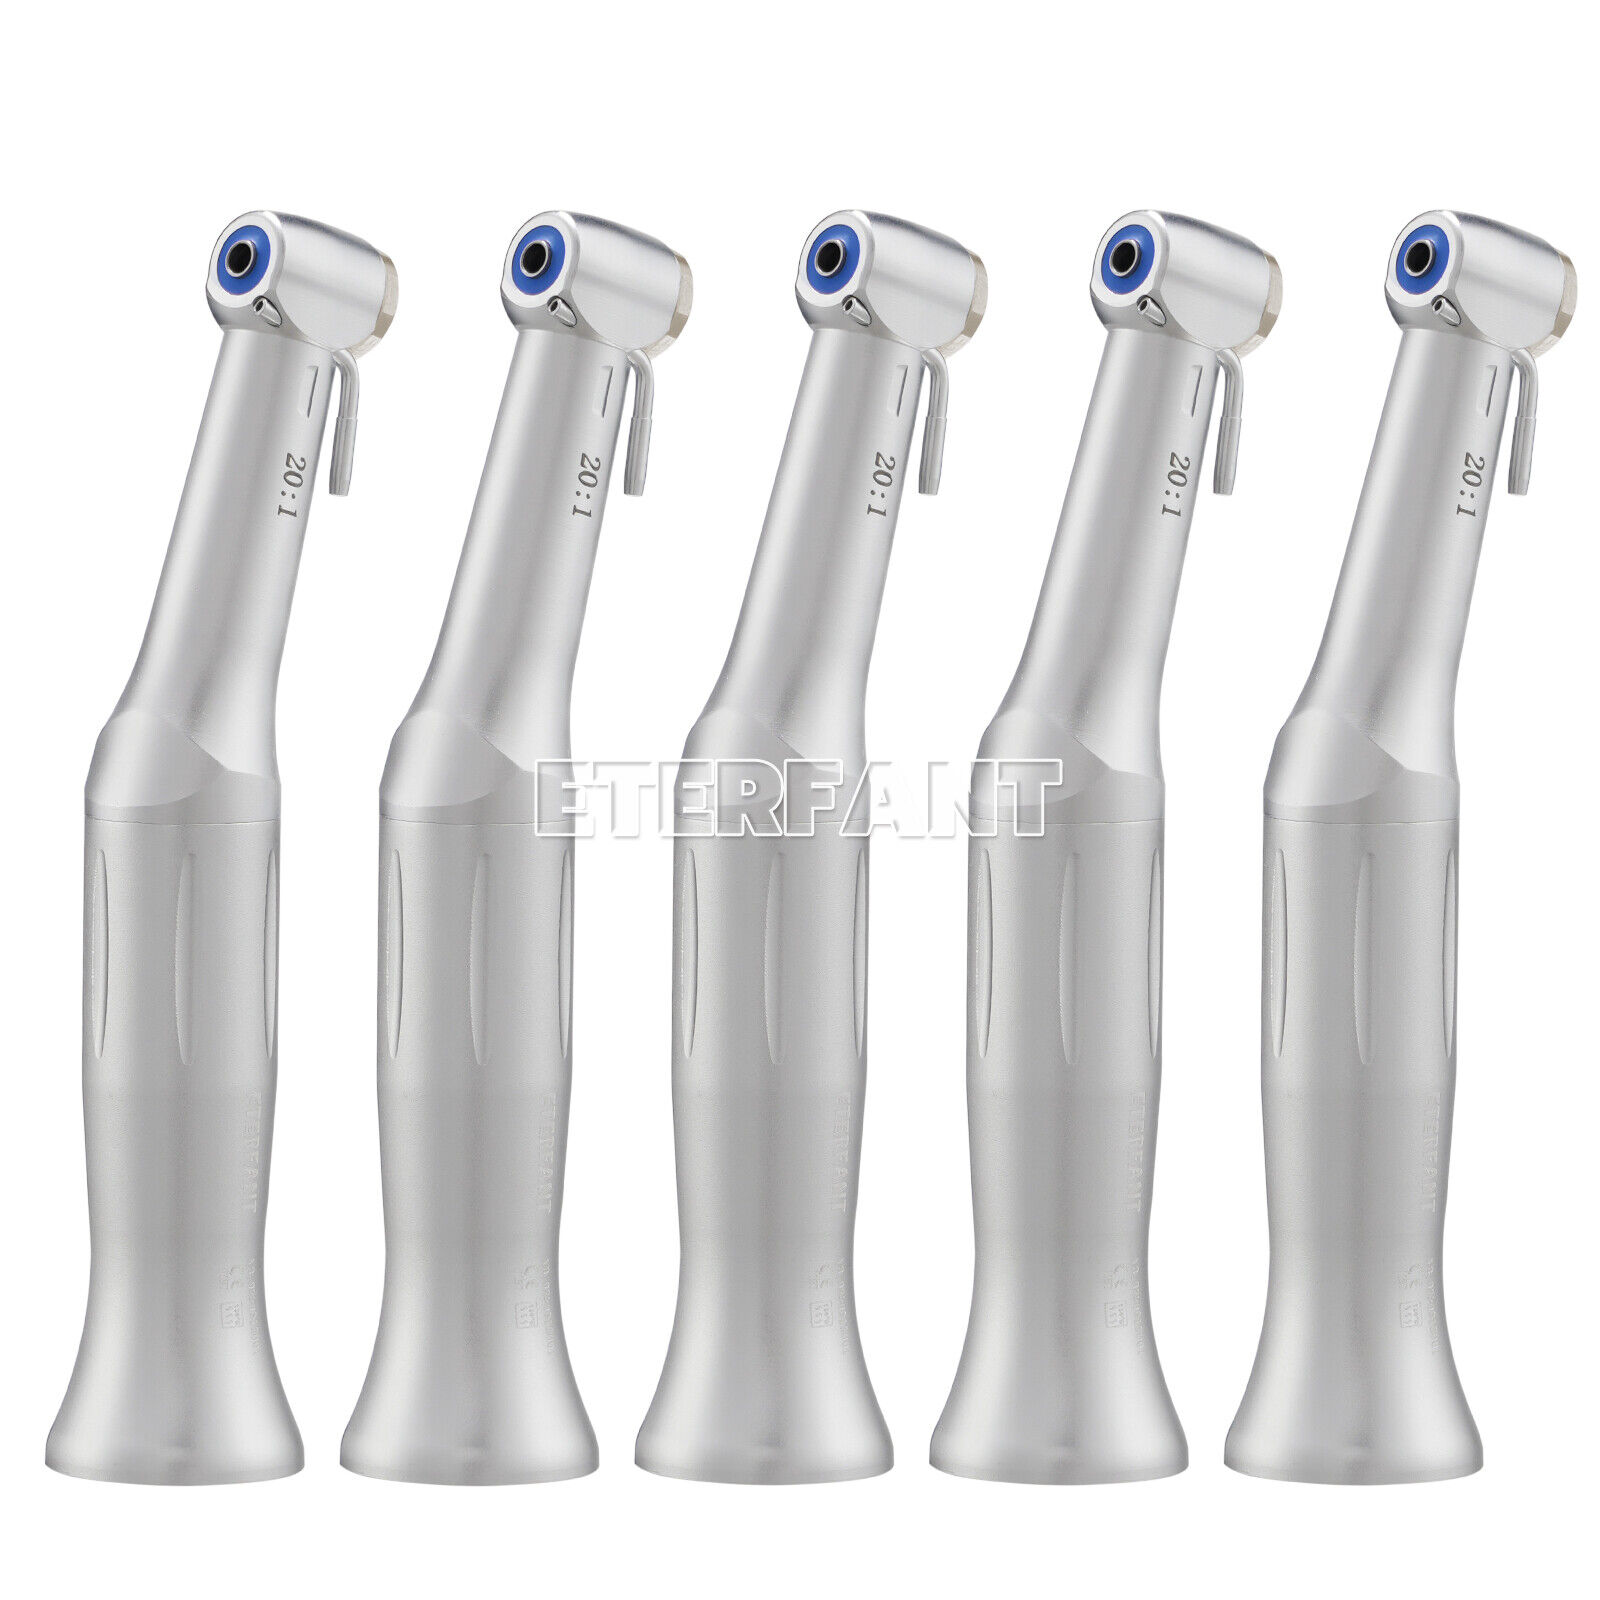 5PCs ETERFANT NSK Style Dental 20:1 Reduction Implant Contra Angle Handpiece